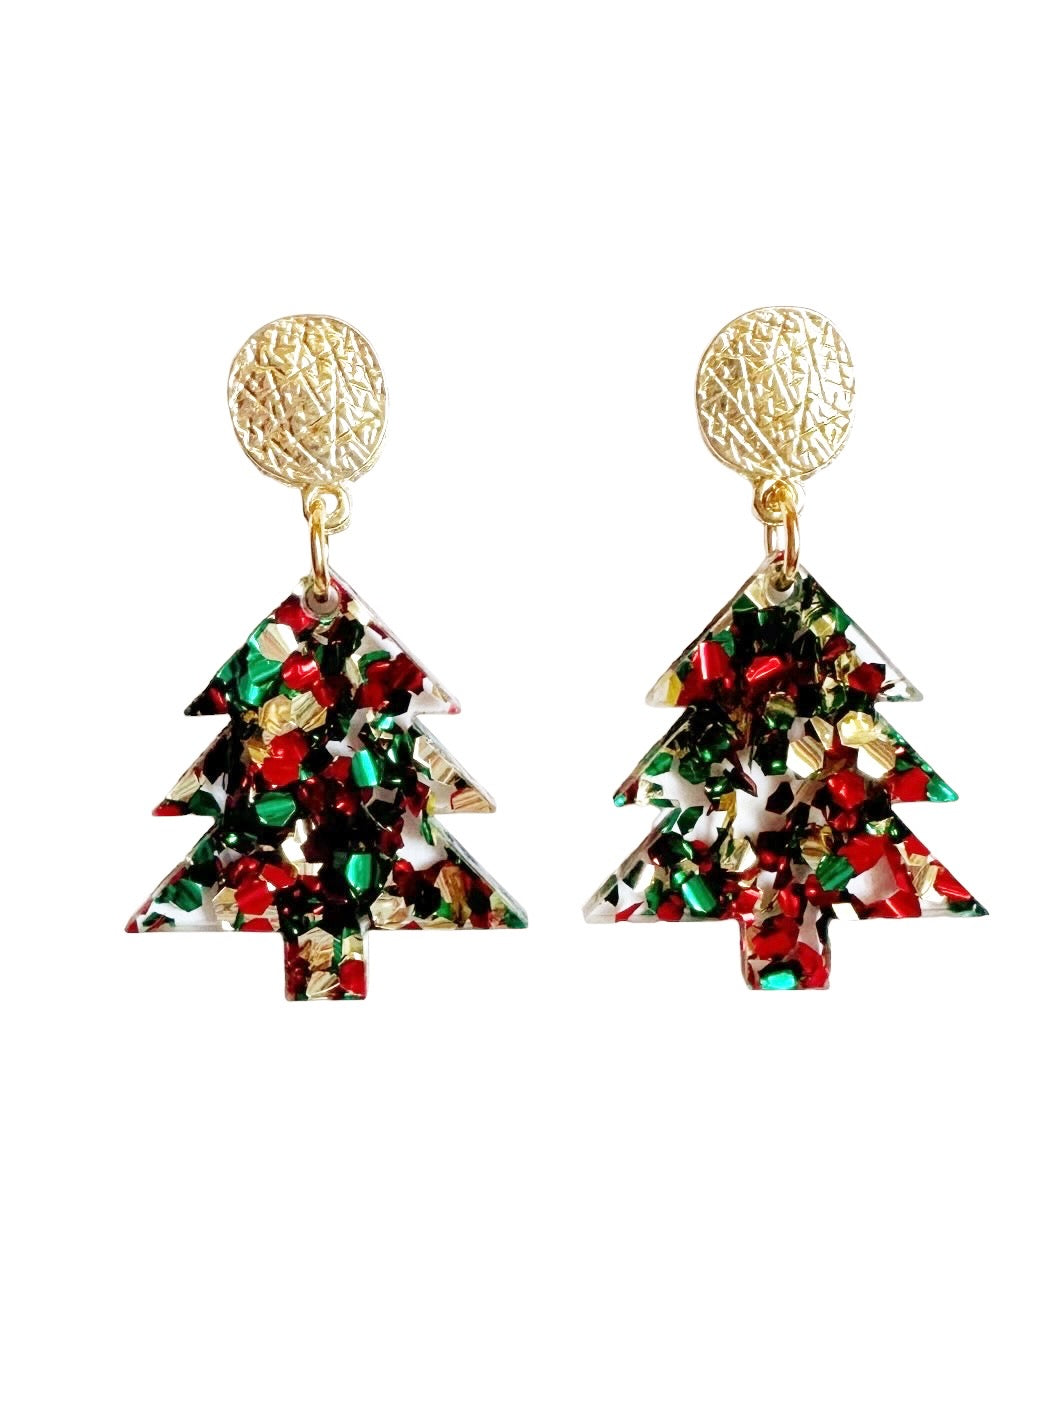 Medium Red, Green, and Gold Christmas Tree